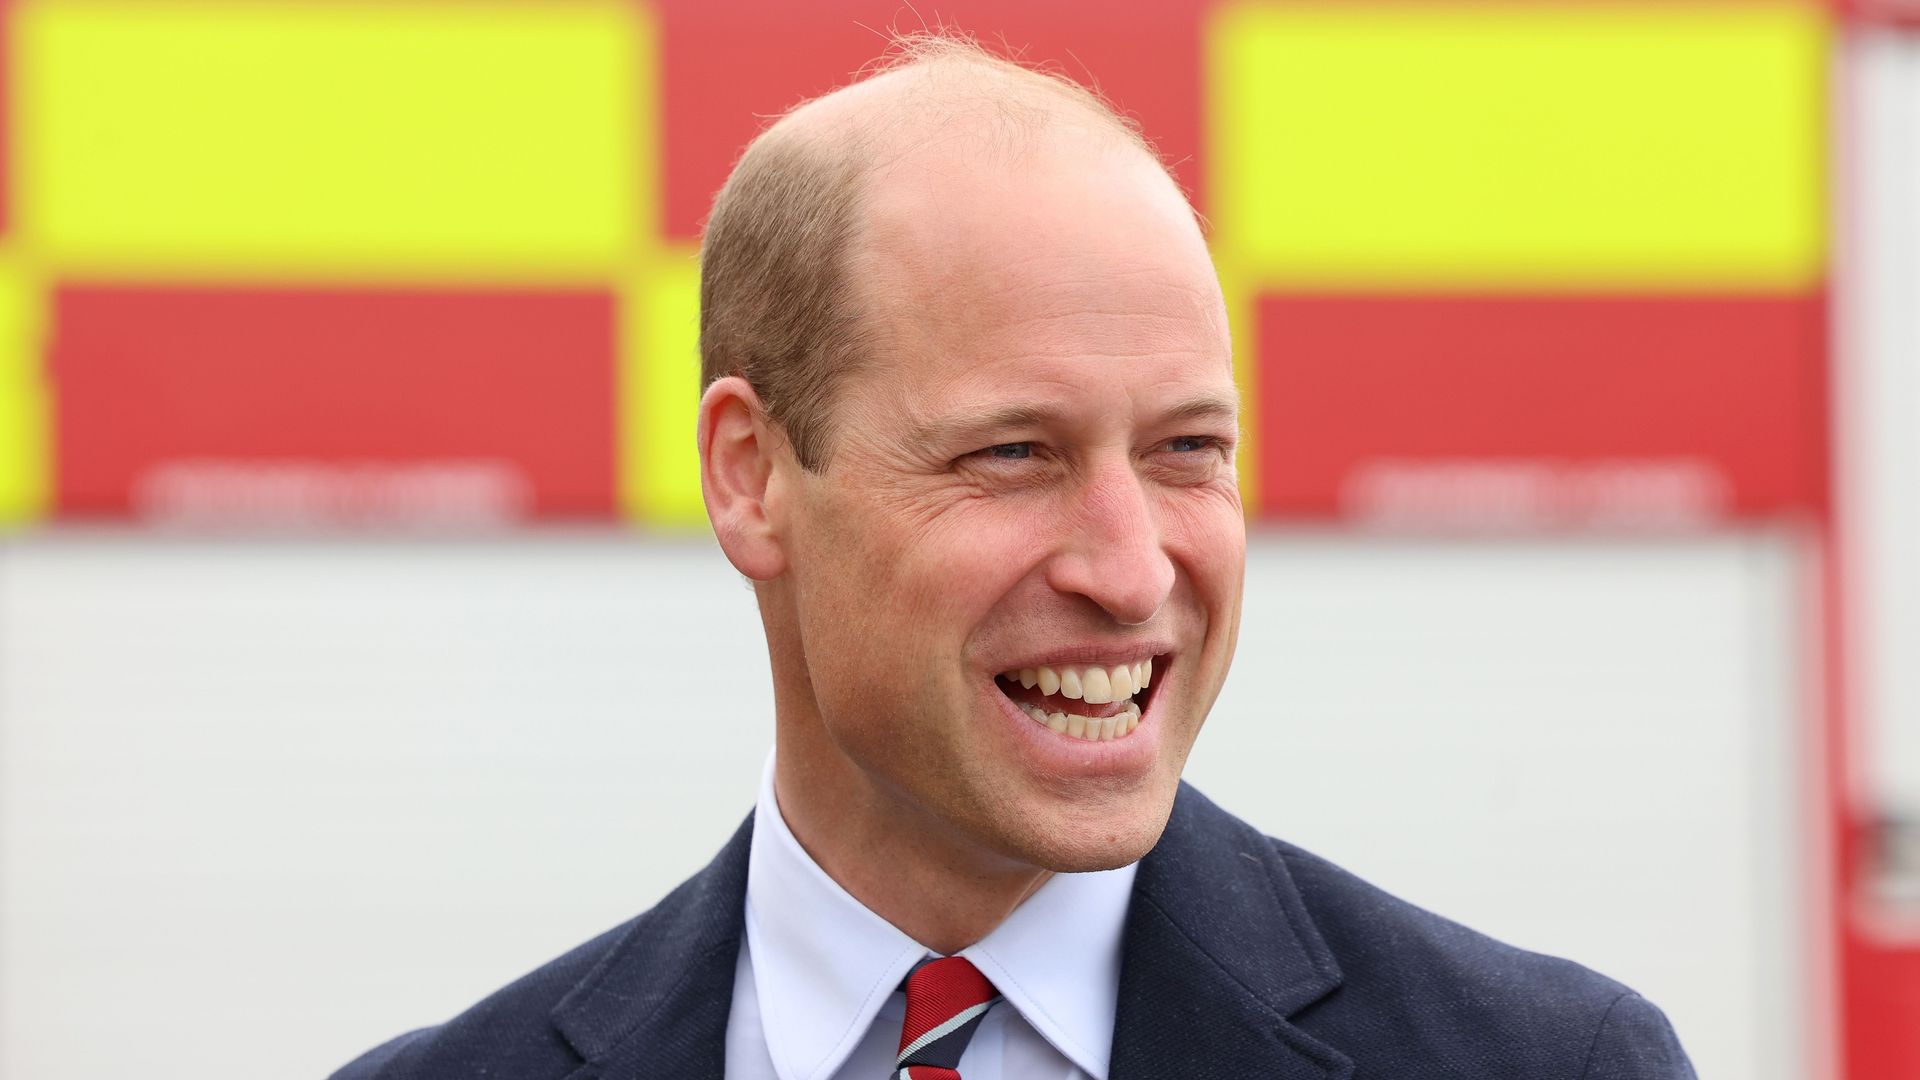 Prince William is seen laughing after a simulated fire response exercise during an official visit at RAF Valley